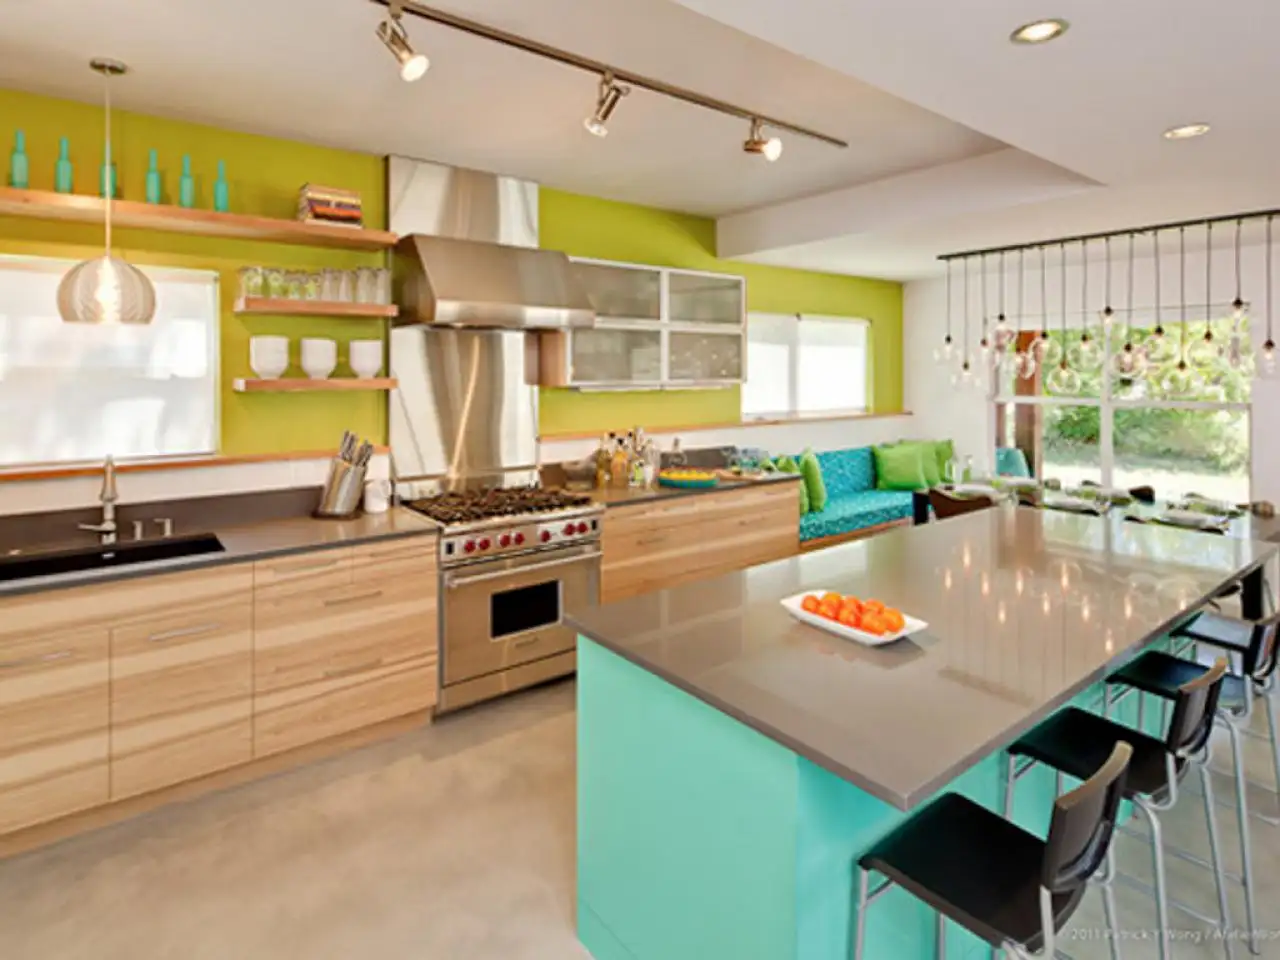 Modern kitchen with island and green accents.